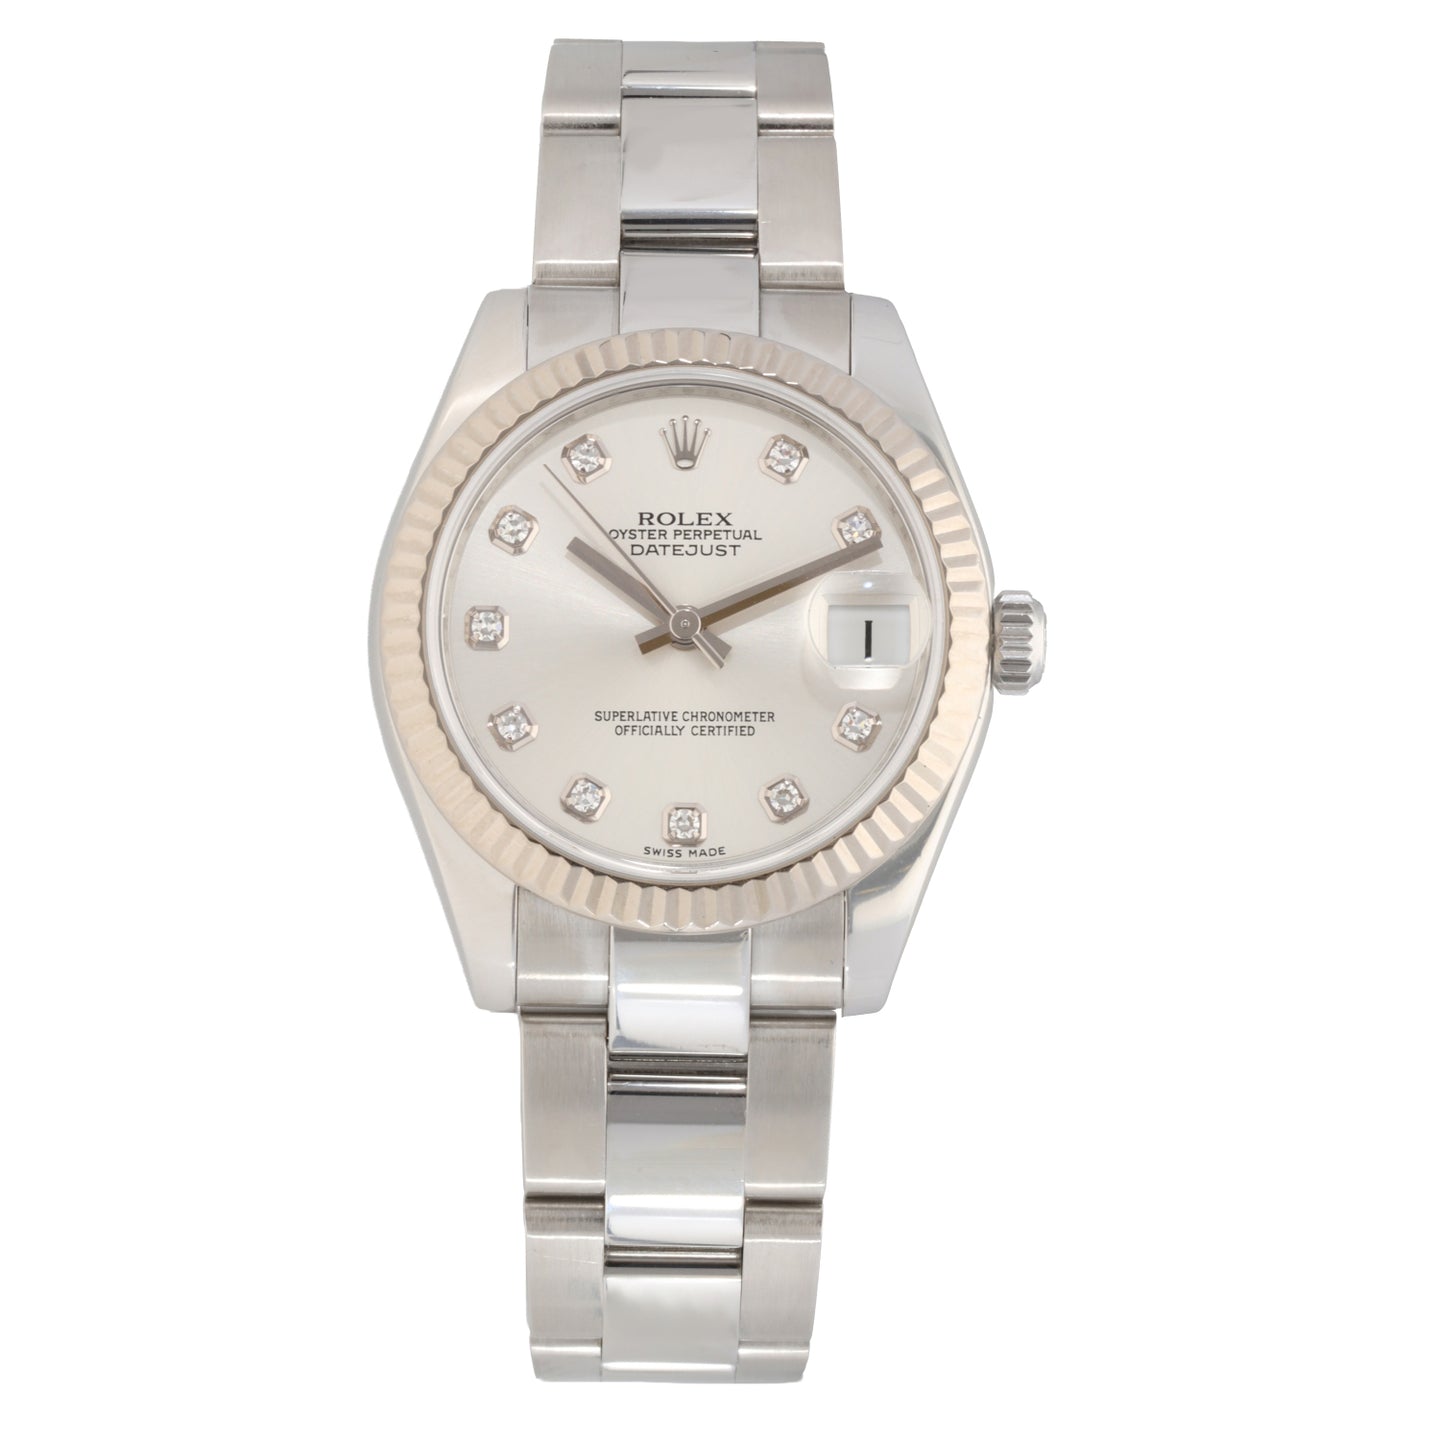 Rolex Lady Datejust 178274 31mm Stainless Steel Watch